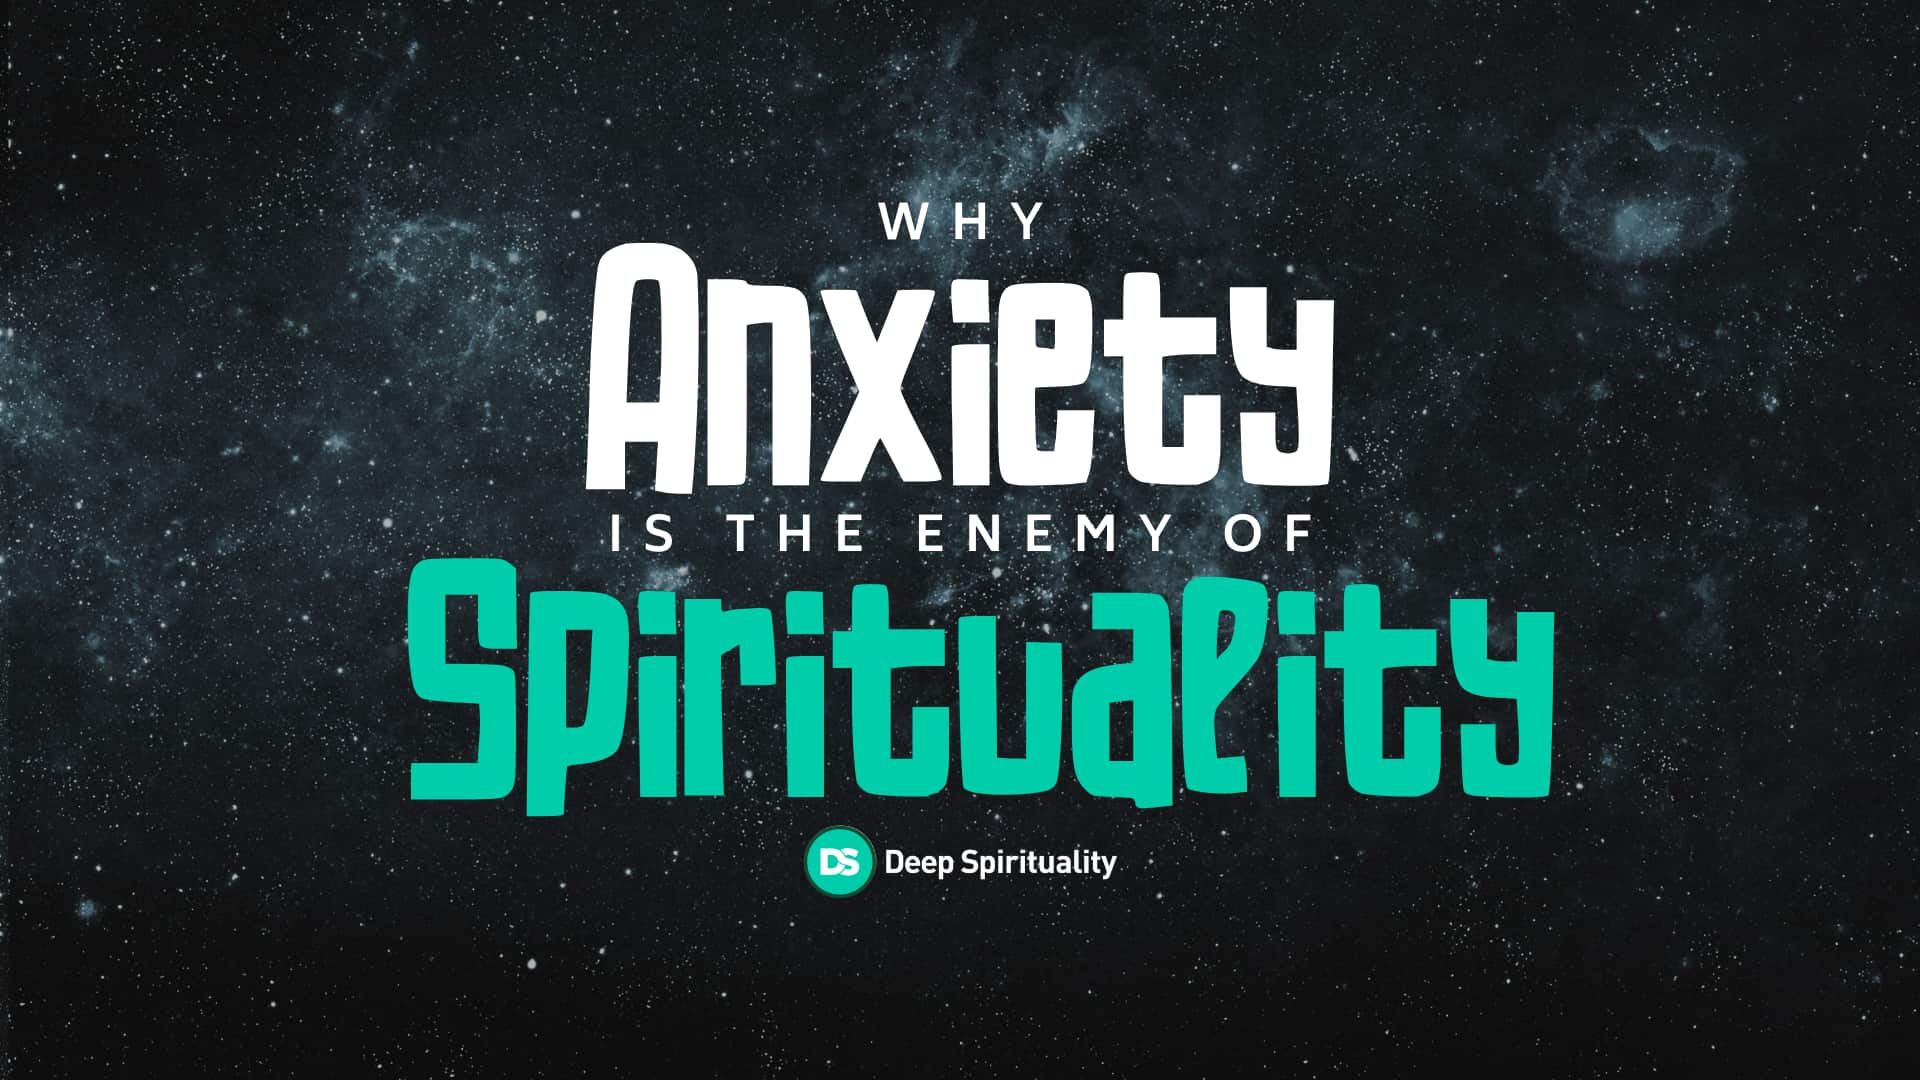 Why Anxiety is the Enemy of Spirituality 4